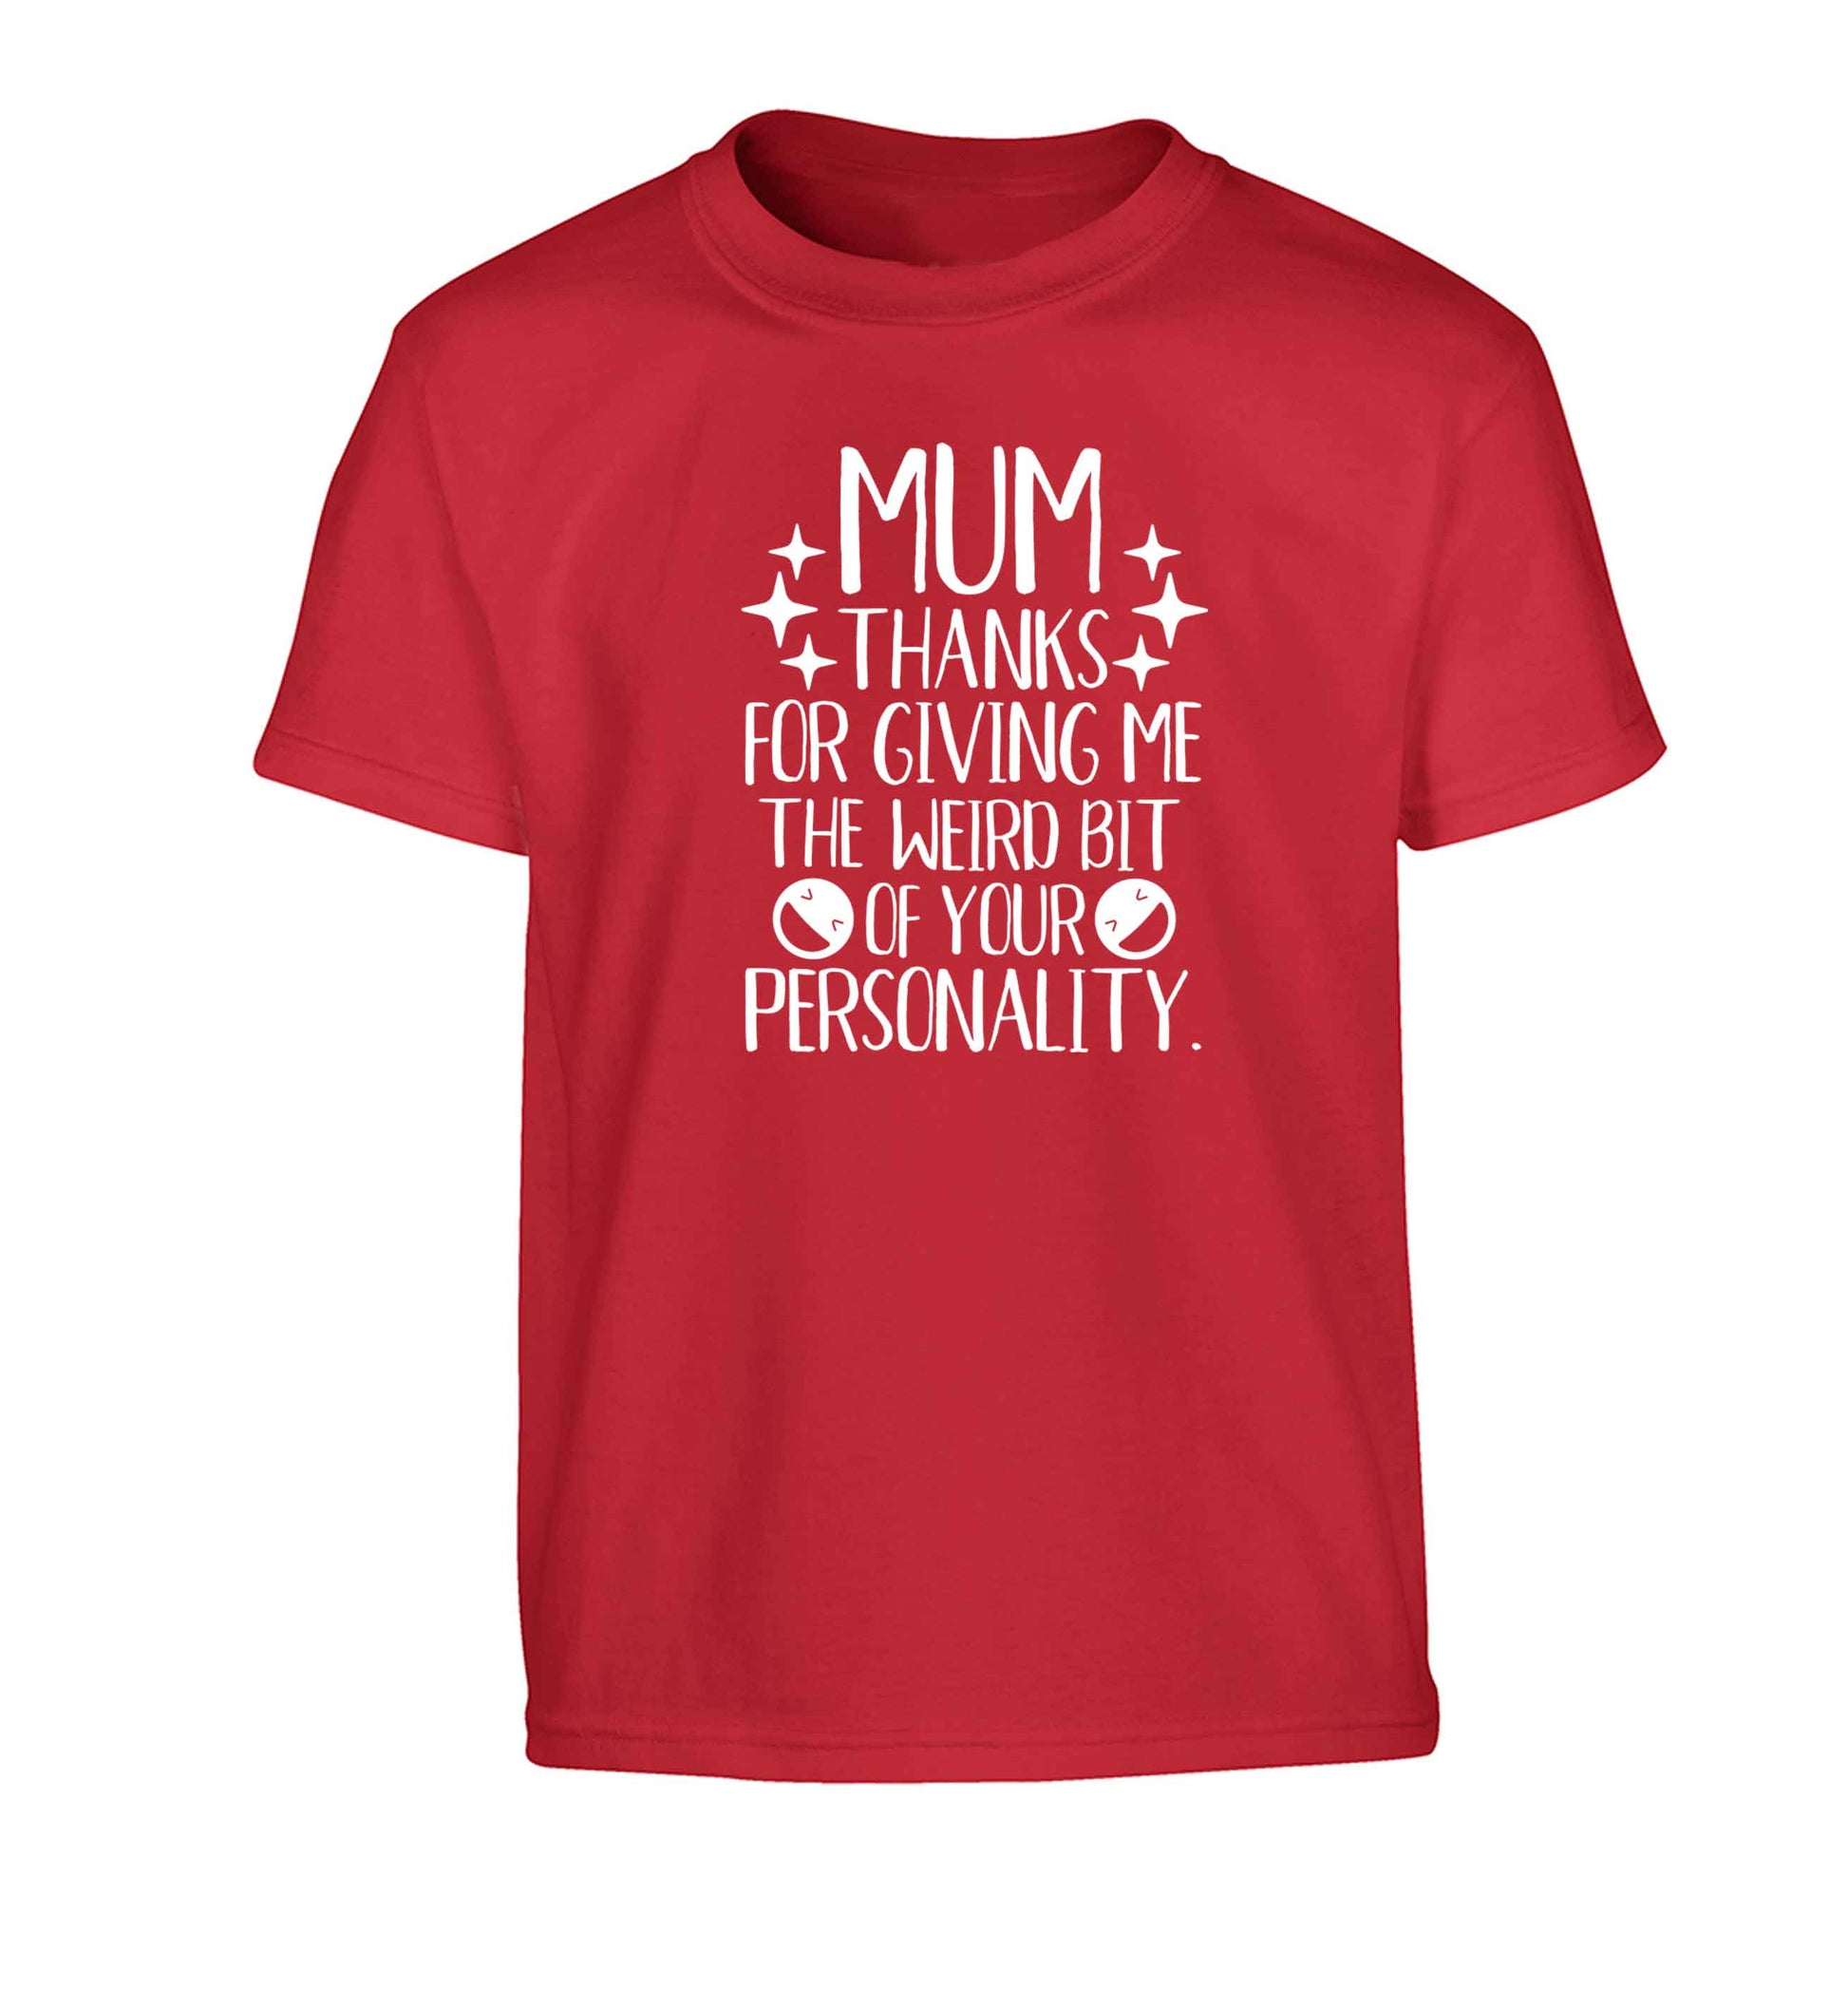 Mum, I love you more than halloumi and if you know me at all you know how deep that is Children's red Tshirt 12-13 Years